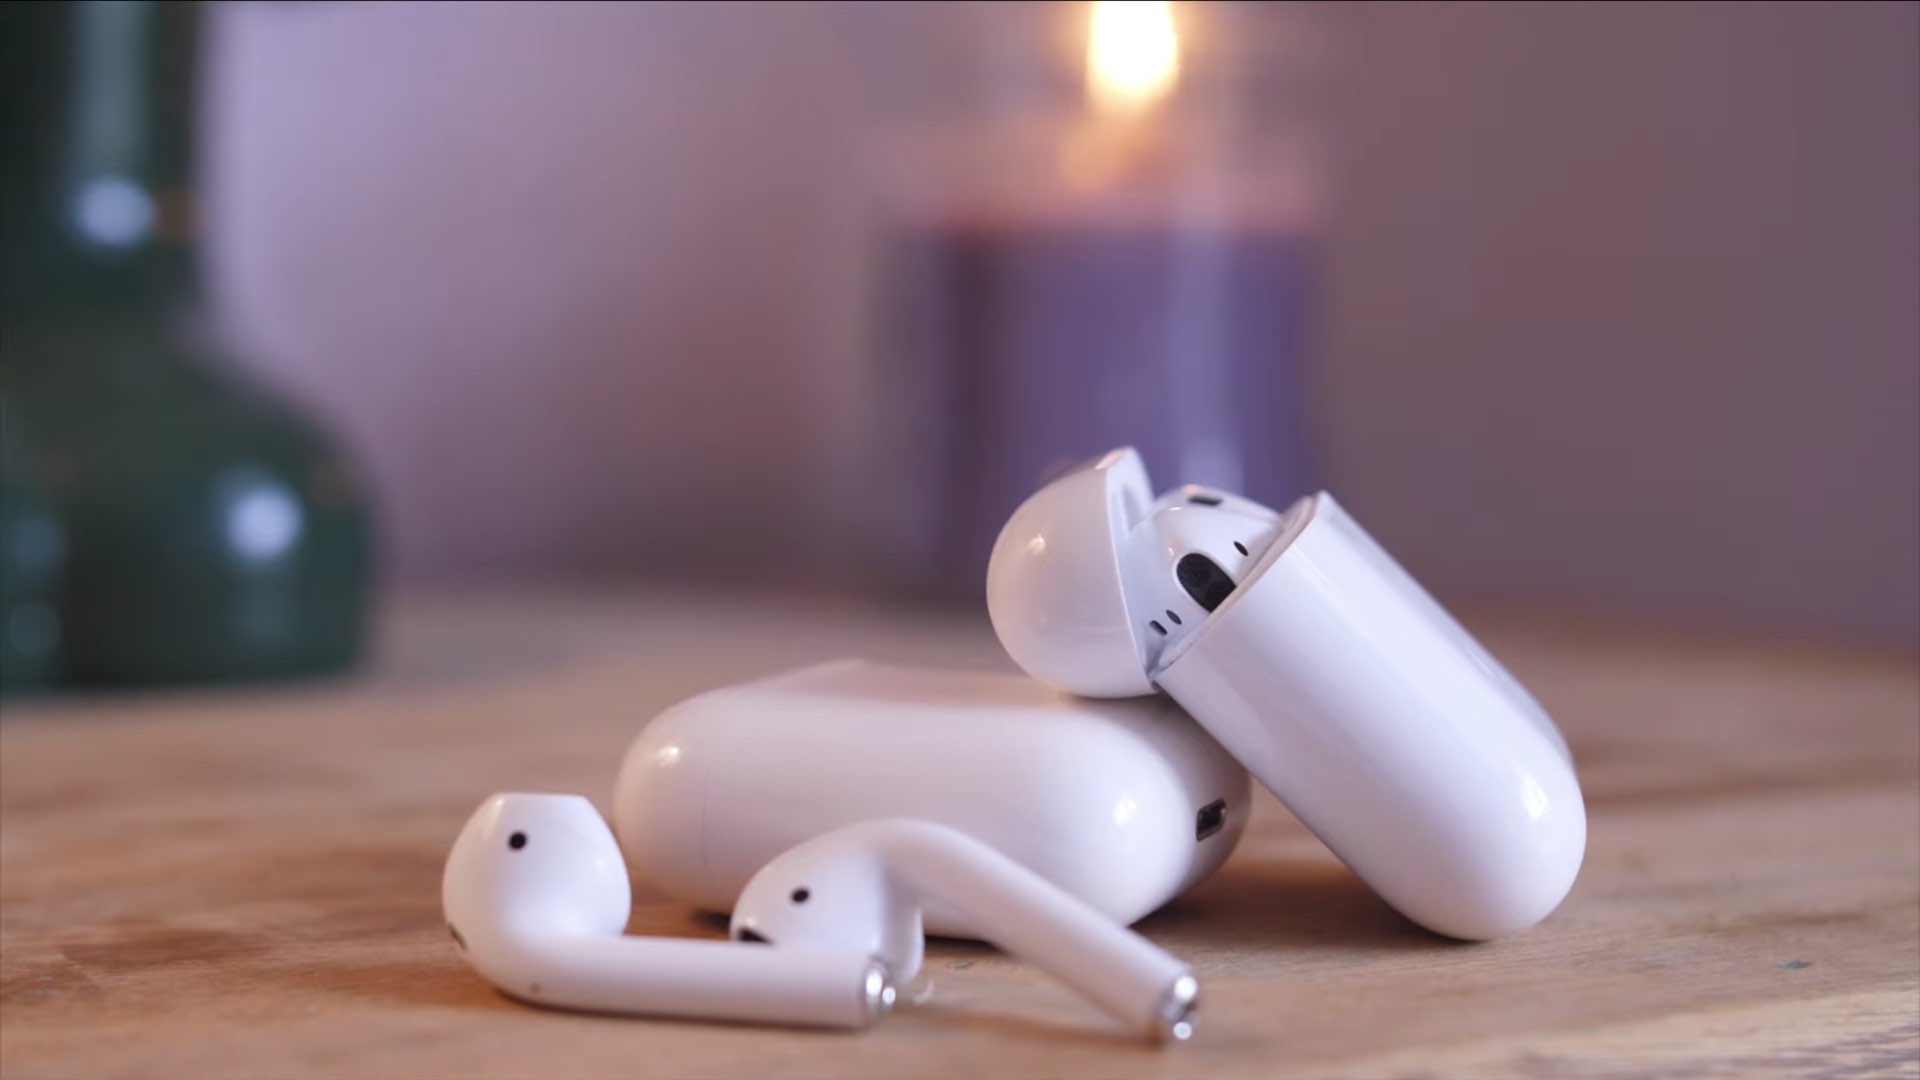 Noise-cancelling AirPods Pro rumored to arrive this month with a price tag of around $260